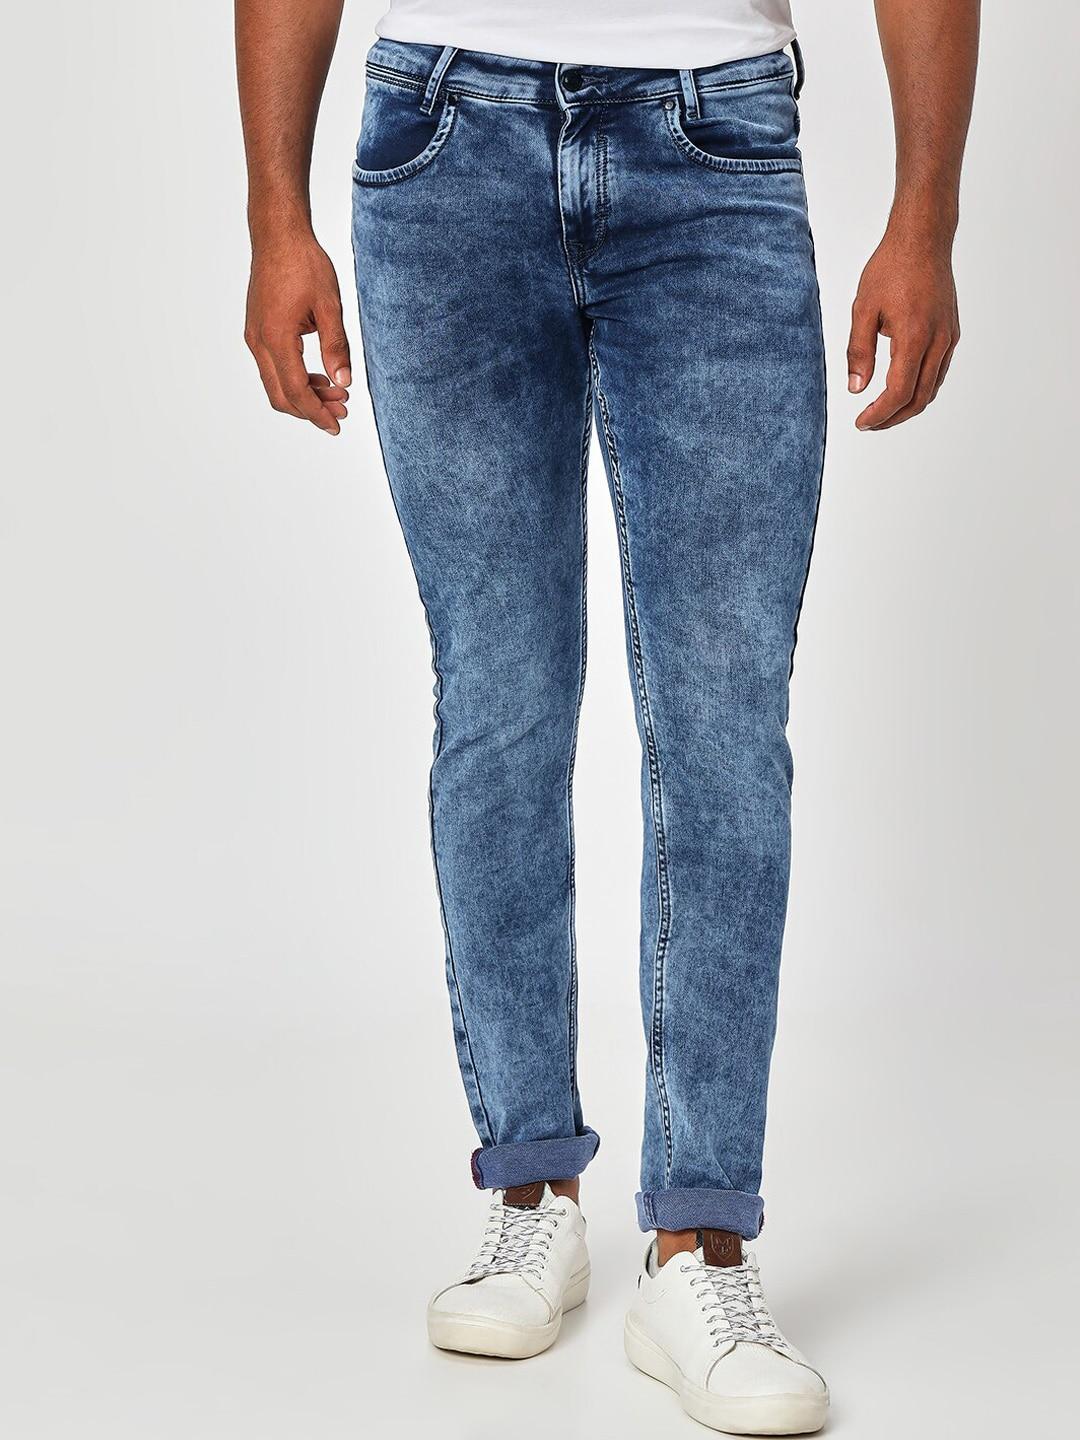 mufti-men-skinny-fit-heavy-fade-stretchable-jeans